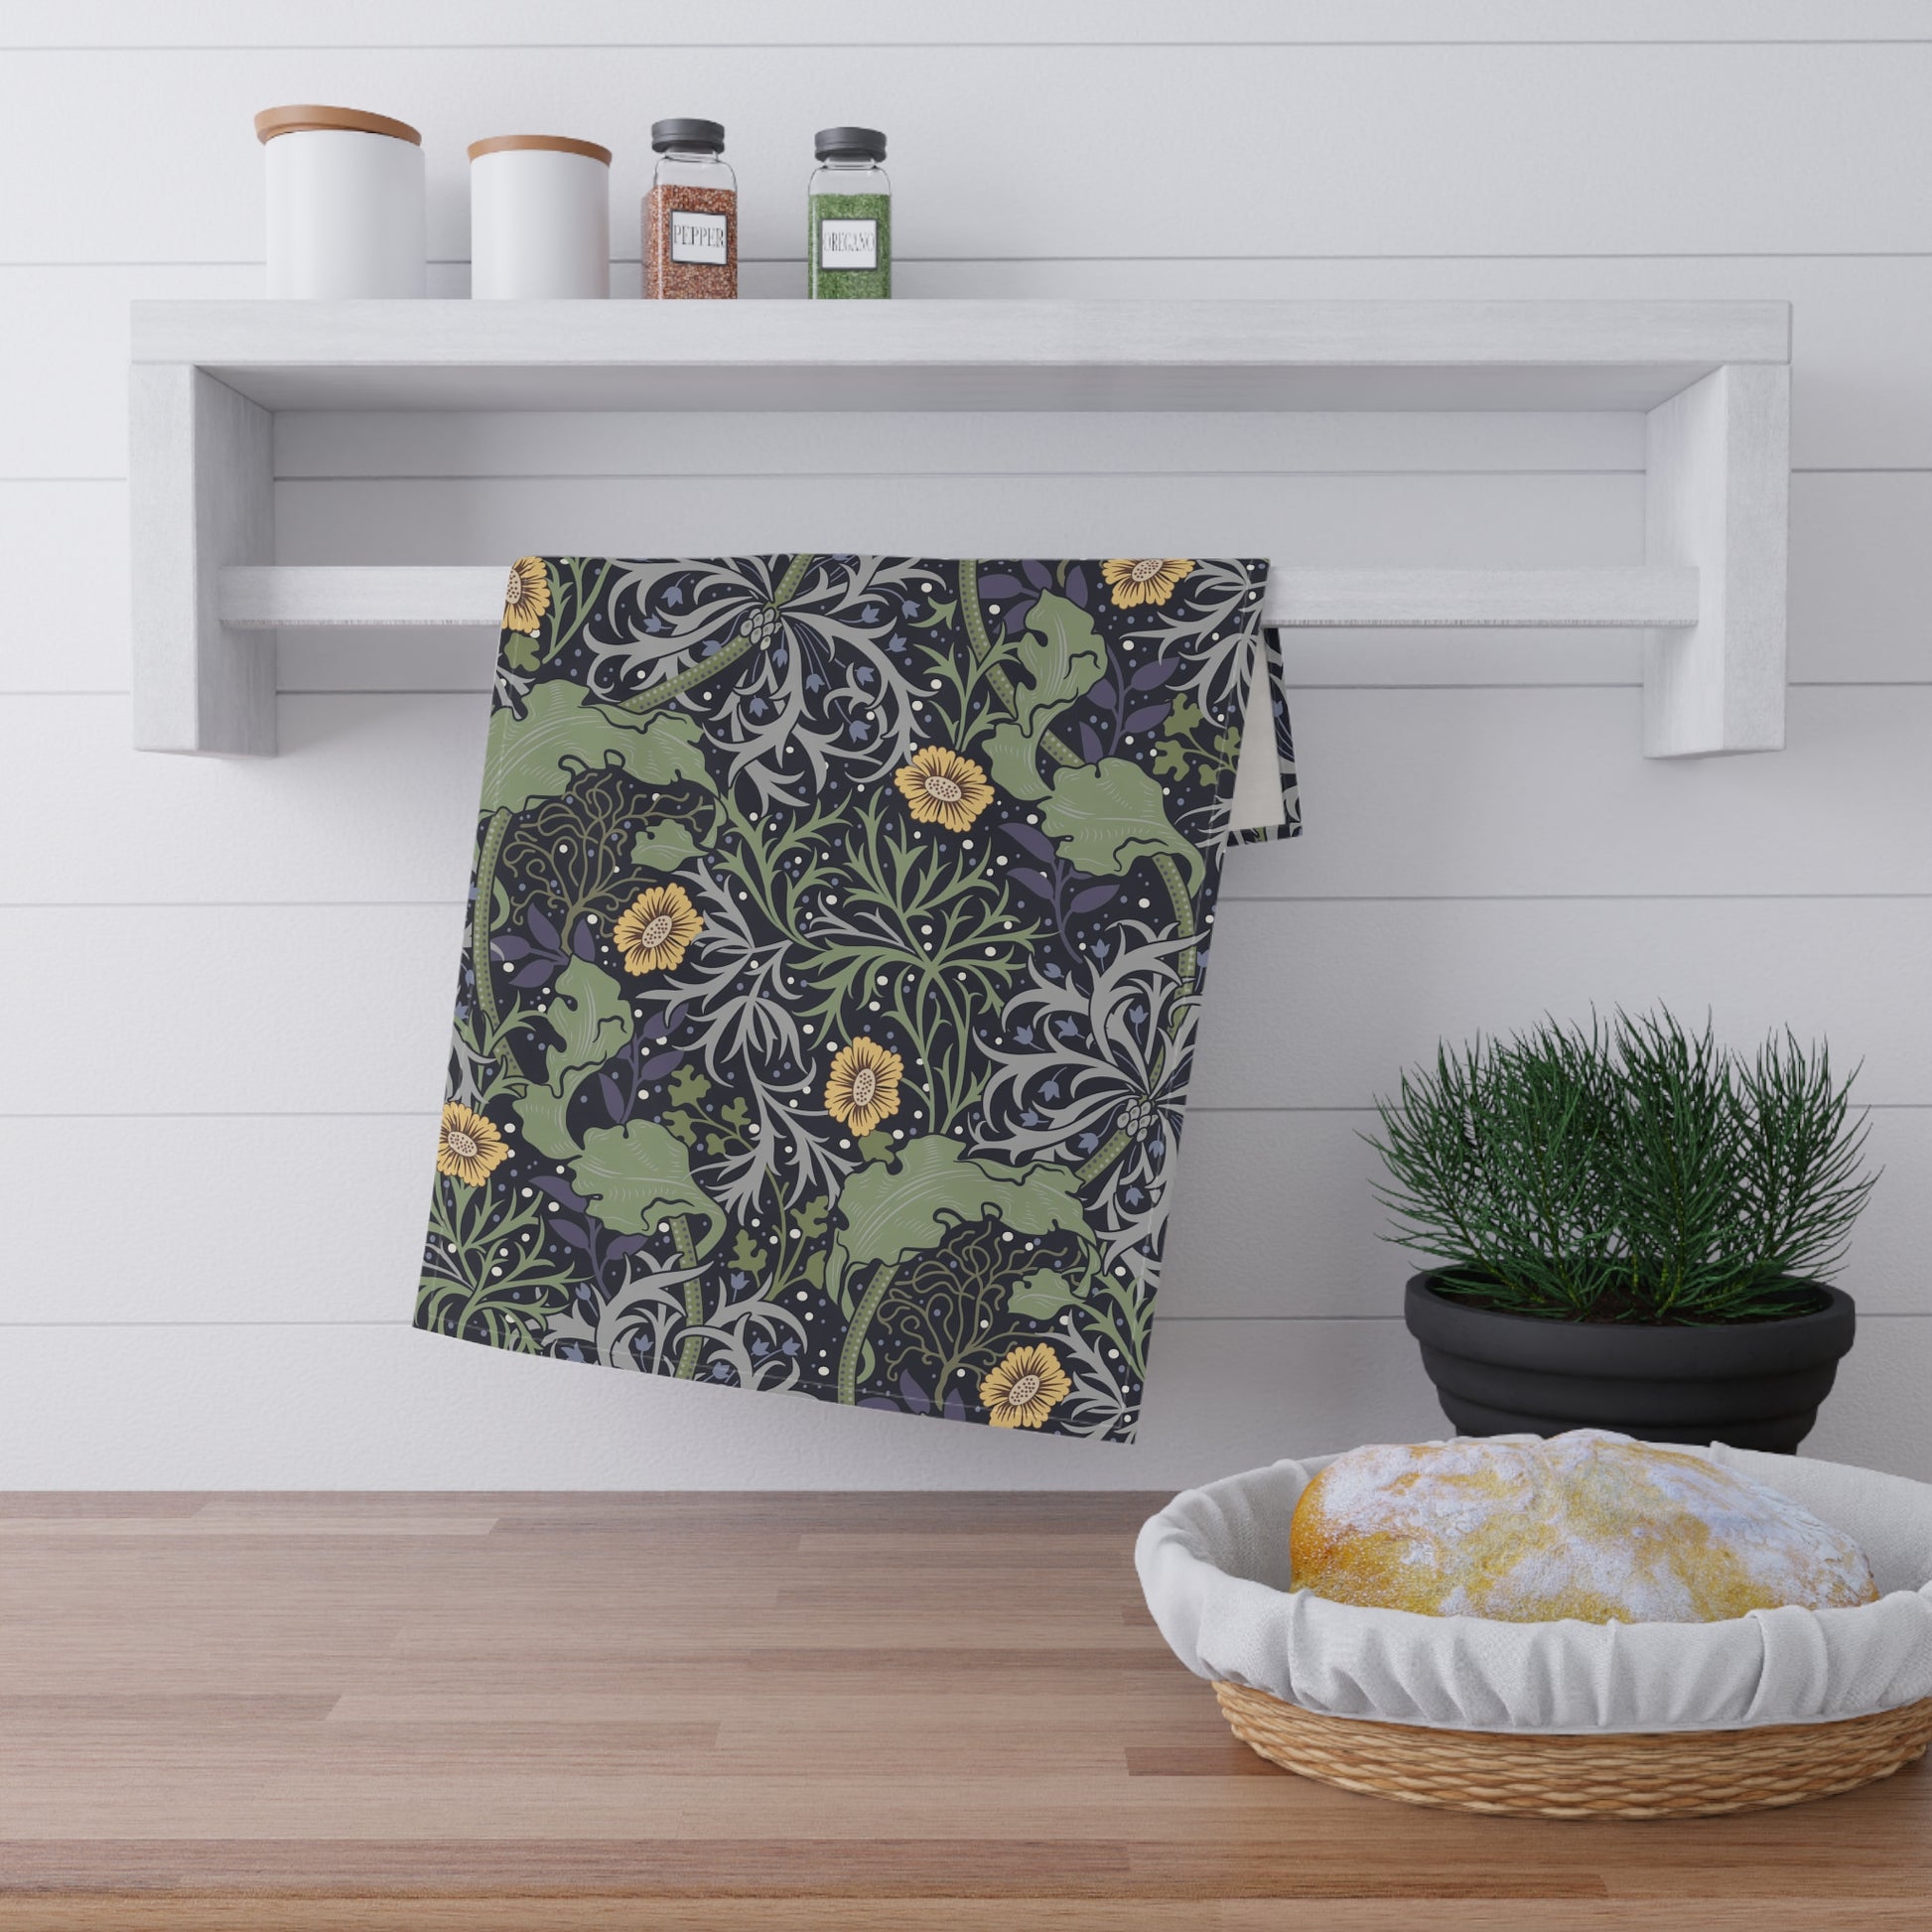 william-morris-co-kitchen-tea-towel-seaweed-collection-yellow-flower-8